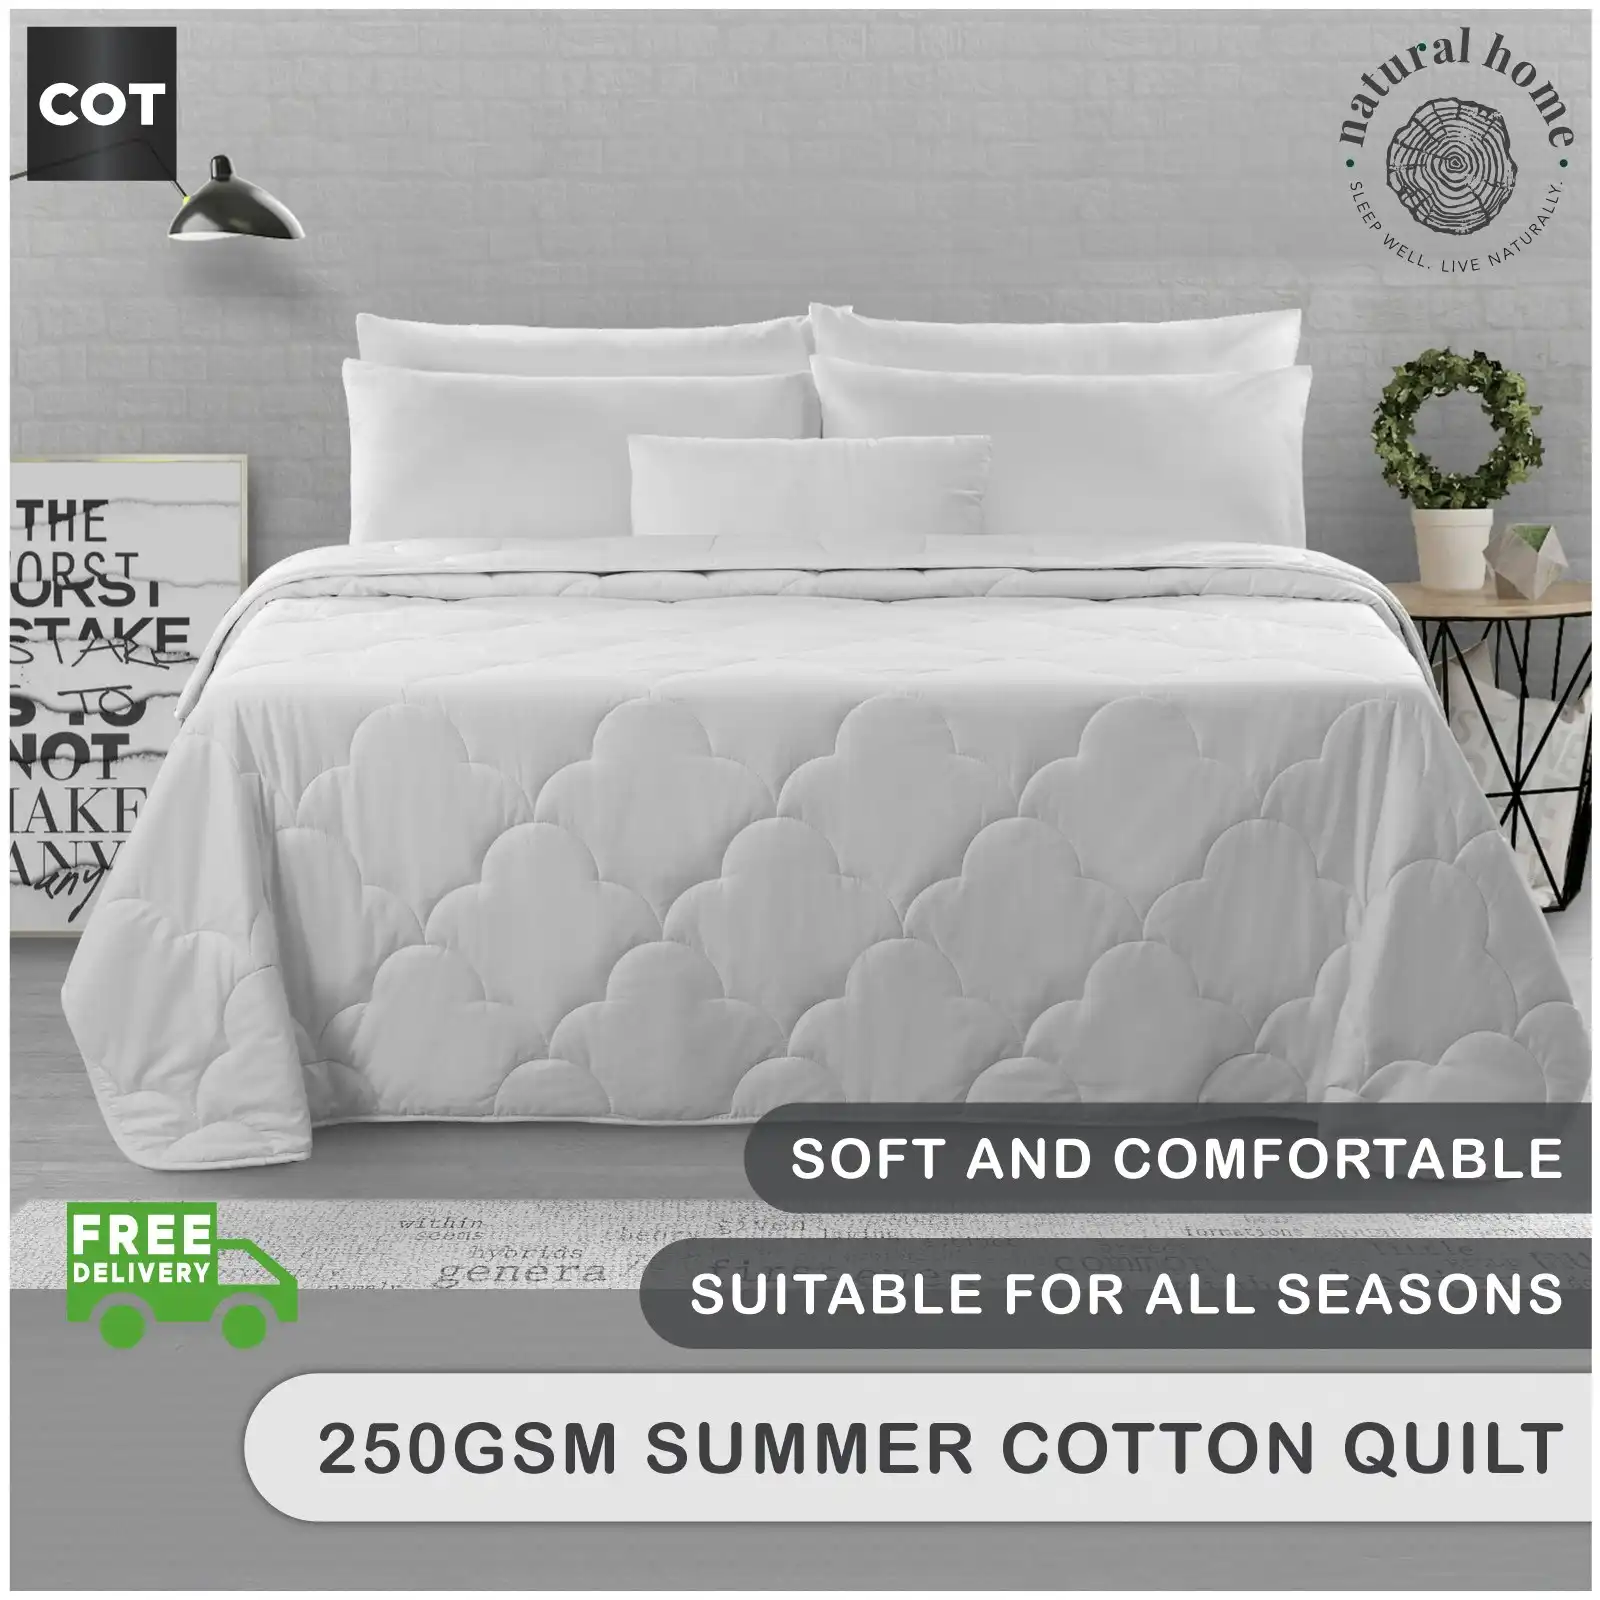 Natural Home Summer Cotton Quilt 250gsm - White - COT